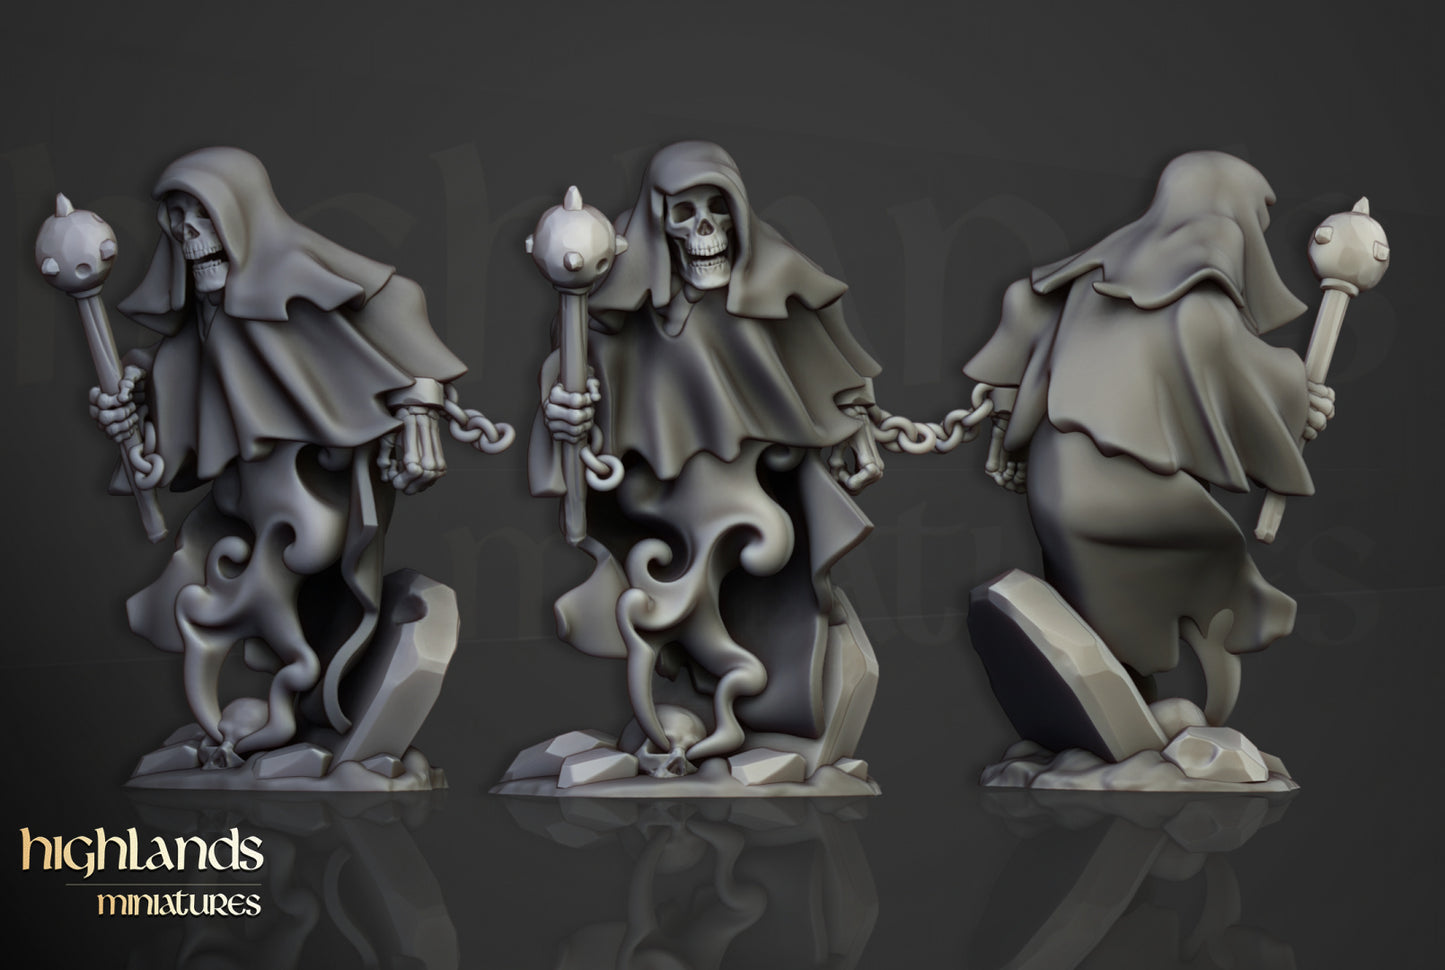 Crypt Ghosts by Highlands Miniatures